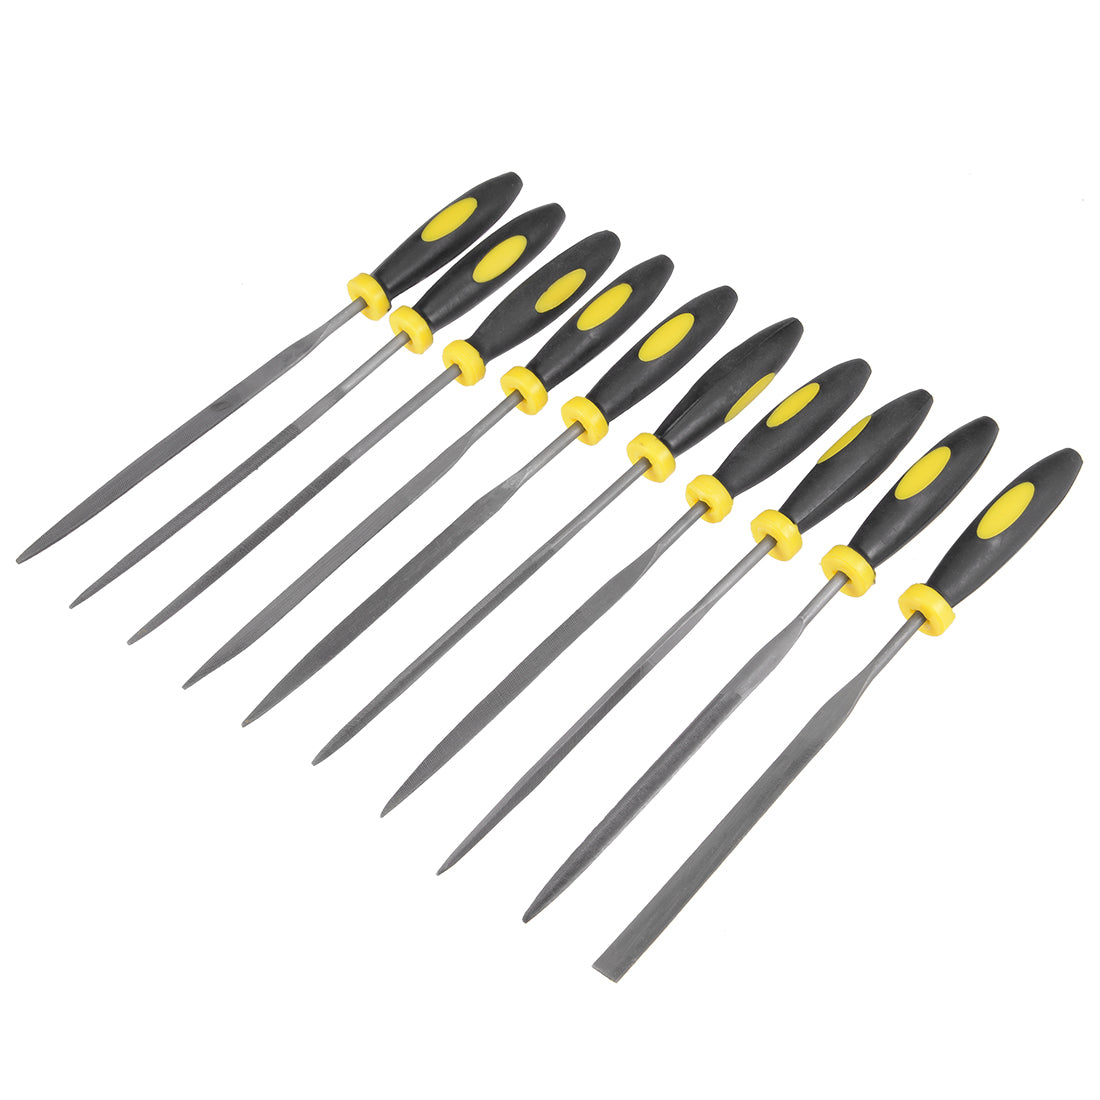 uxcell Uxcell 10Pcs Smooth Cut Bearing Steel Needle File Set with Rubber Handle, 3mm x 150mm